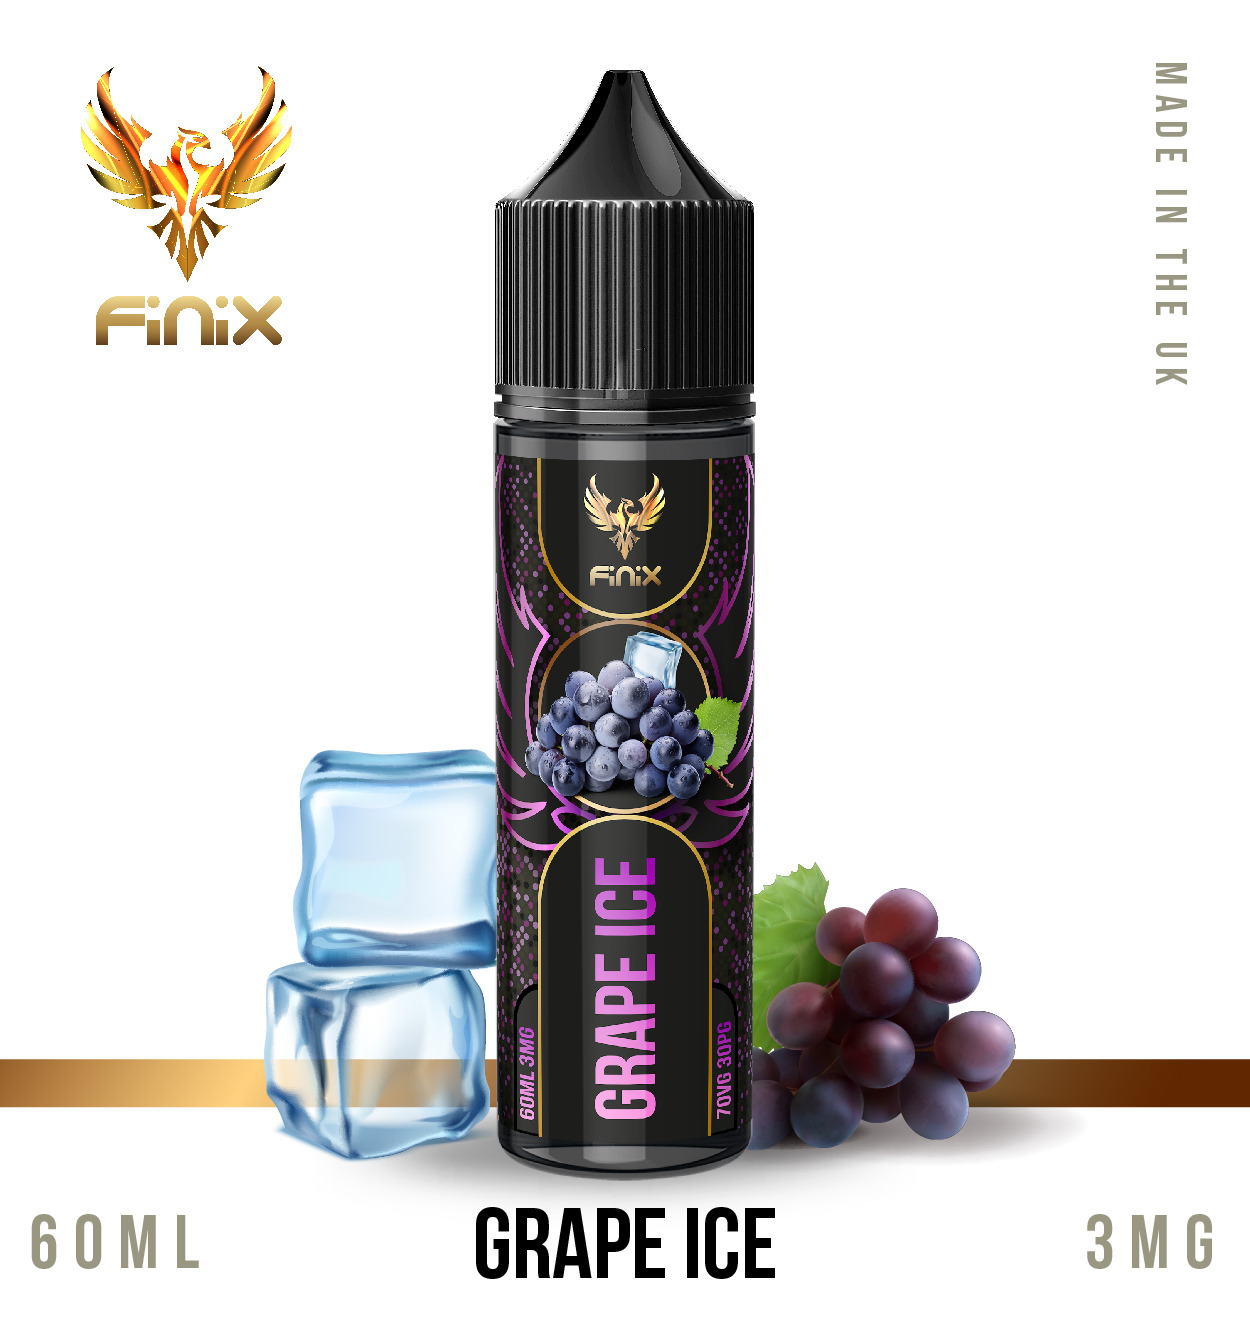 JUICE FRUIT SERIES FINIX - Explore a World of Flavor and Clouds!